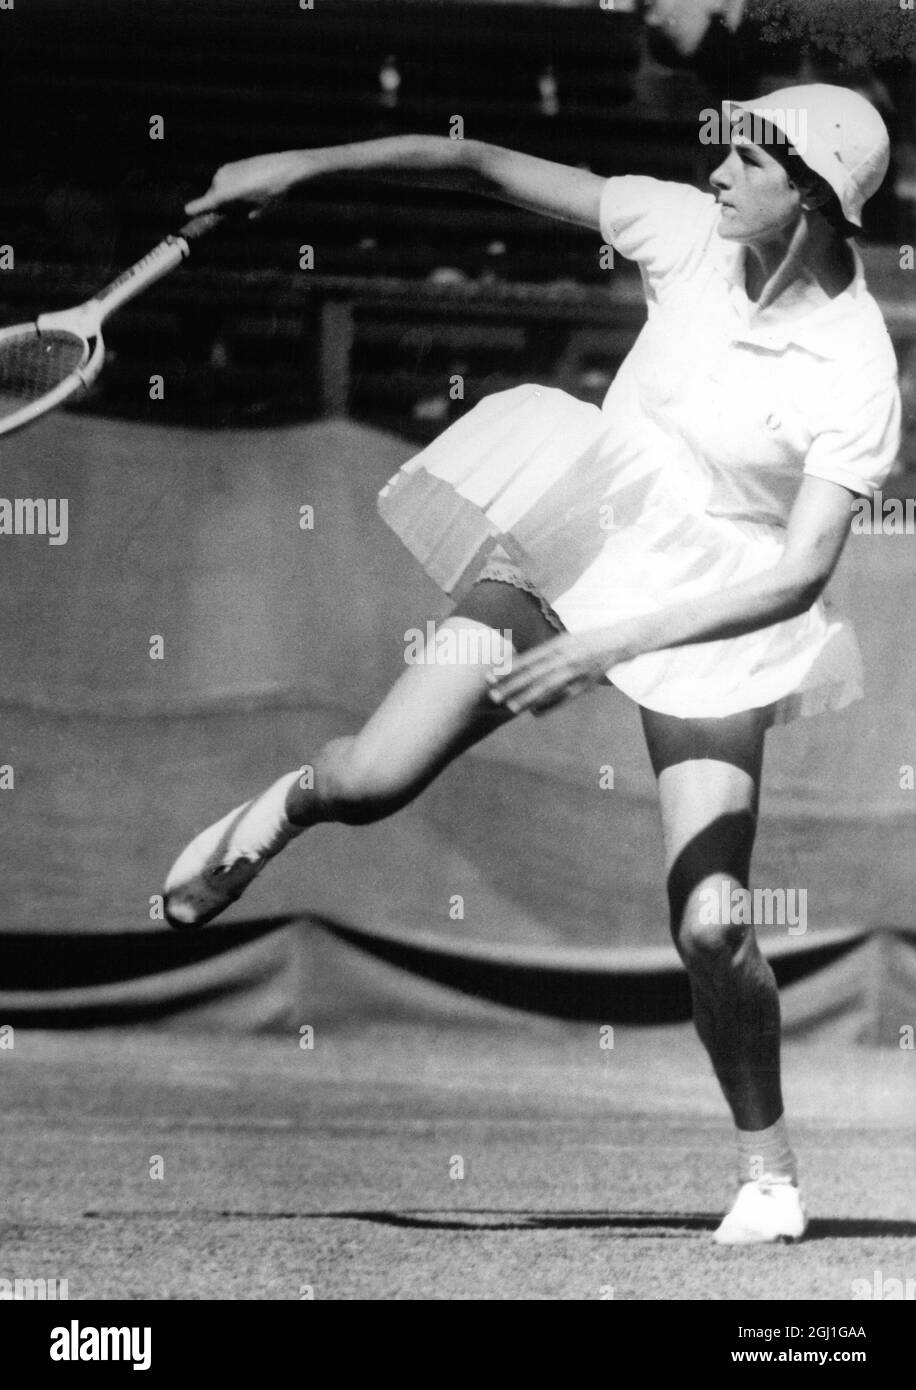 Tennis player Miss Margaret Smith Court v Miss Jan Lehane during the final  of the Australian Tennis Championships , at Brisbane . 11 February 1960  Stock Photo - Alamy